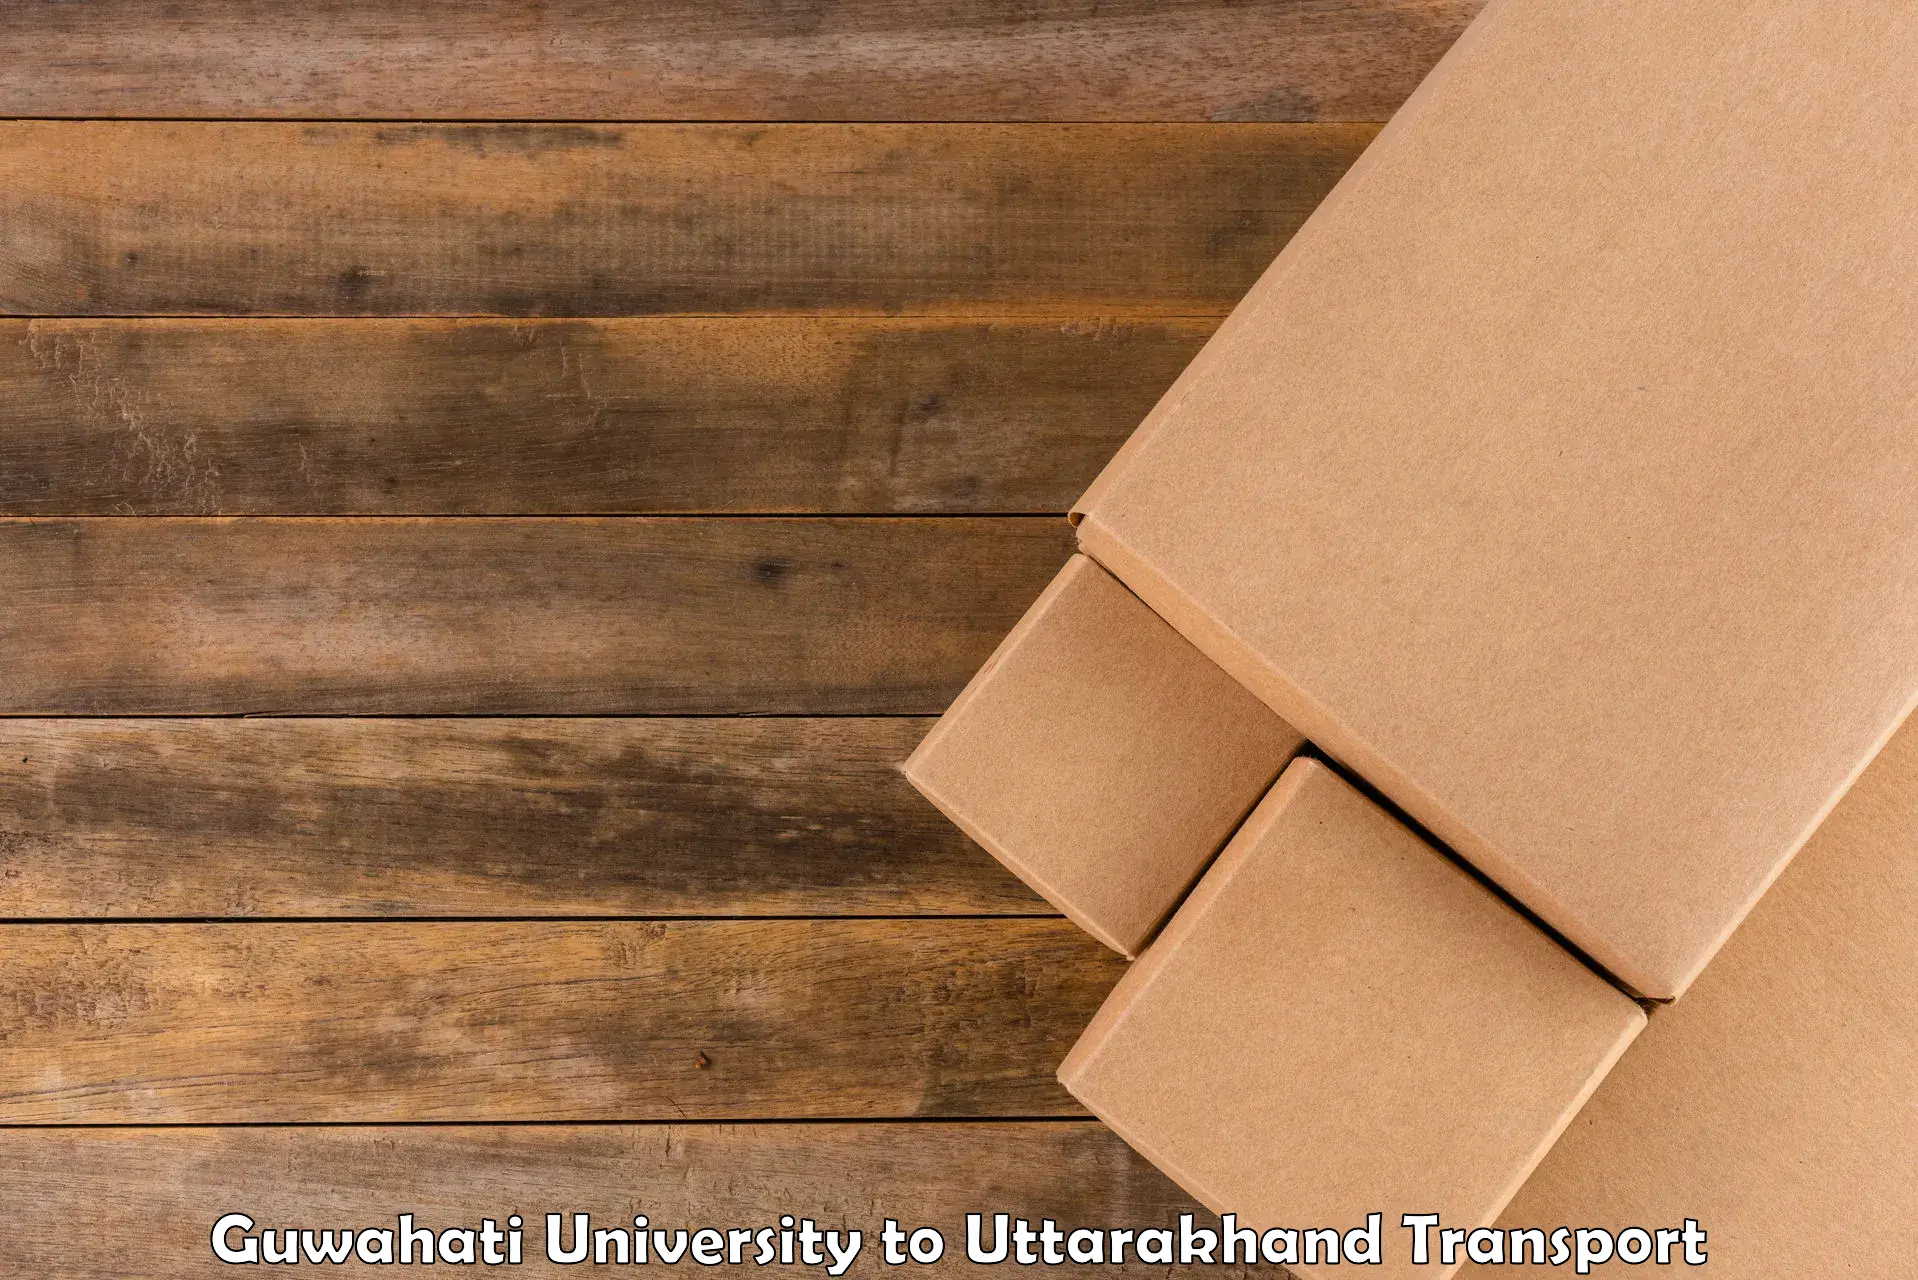 Goods transport services Guwahati University to Lohaghat